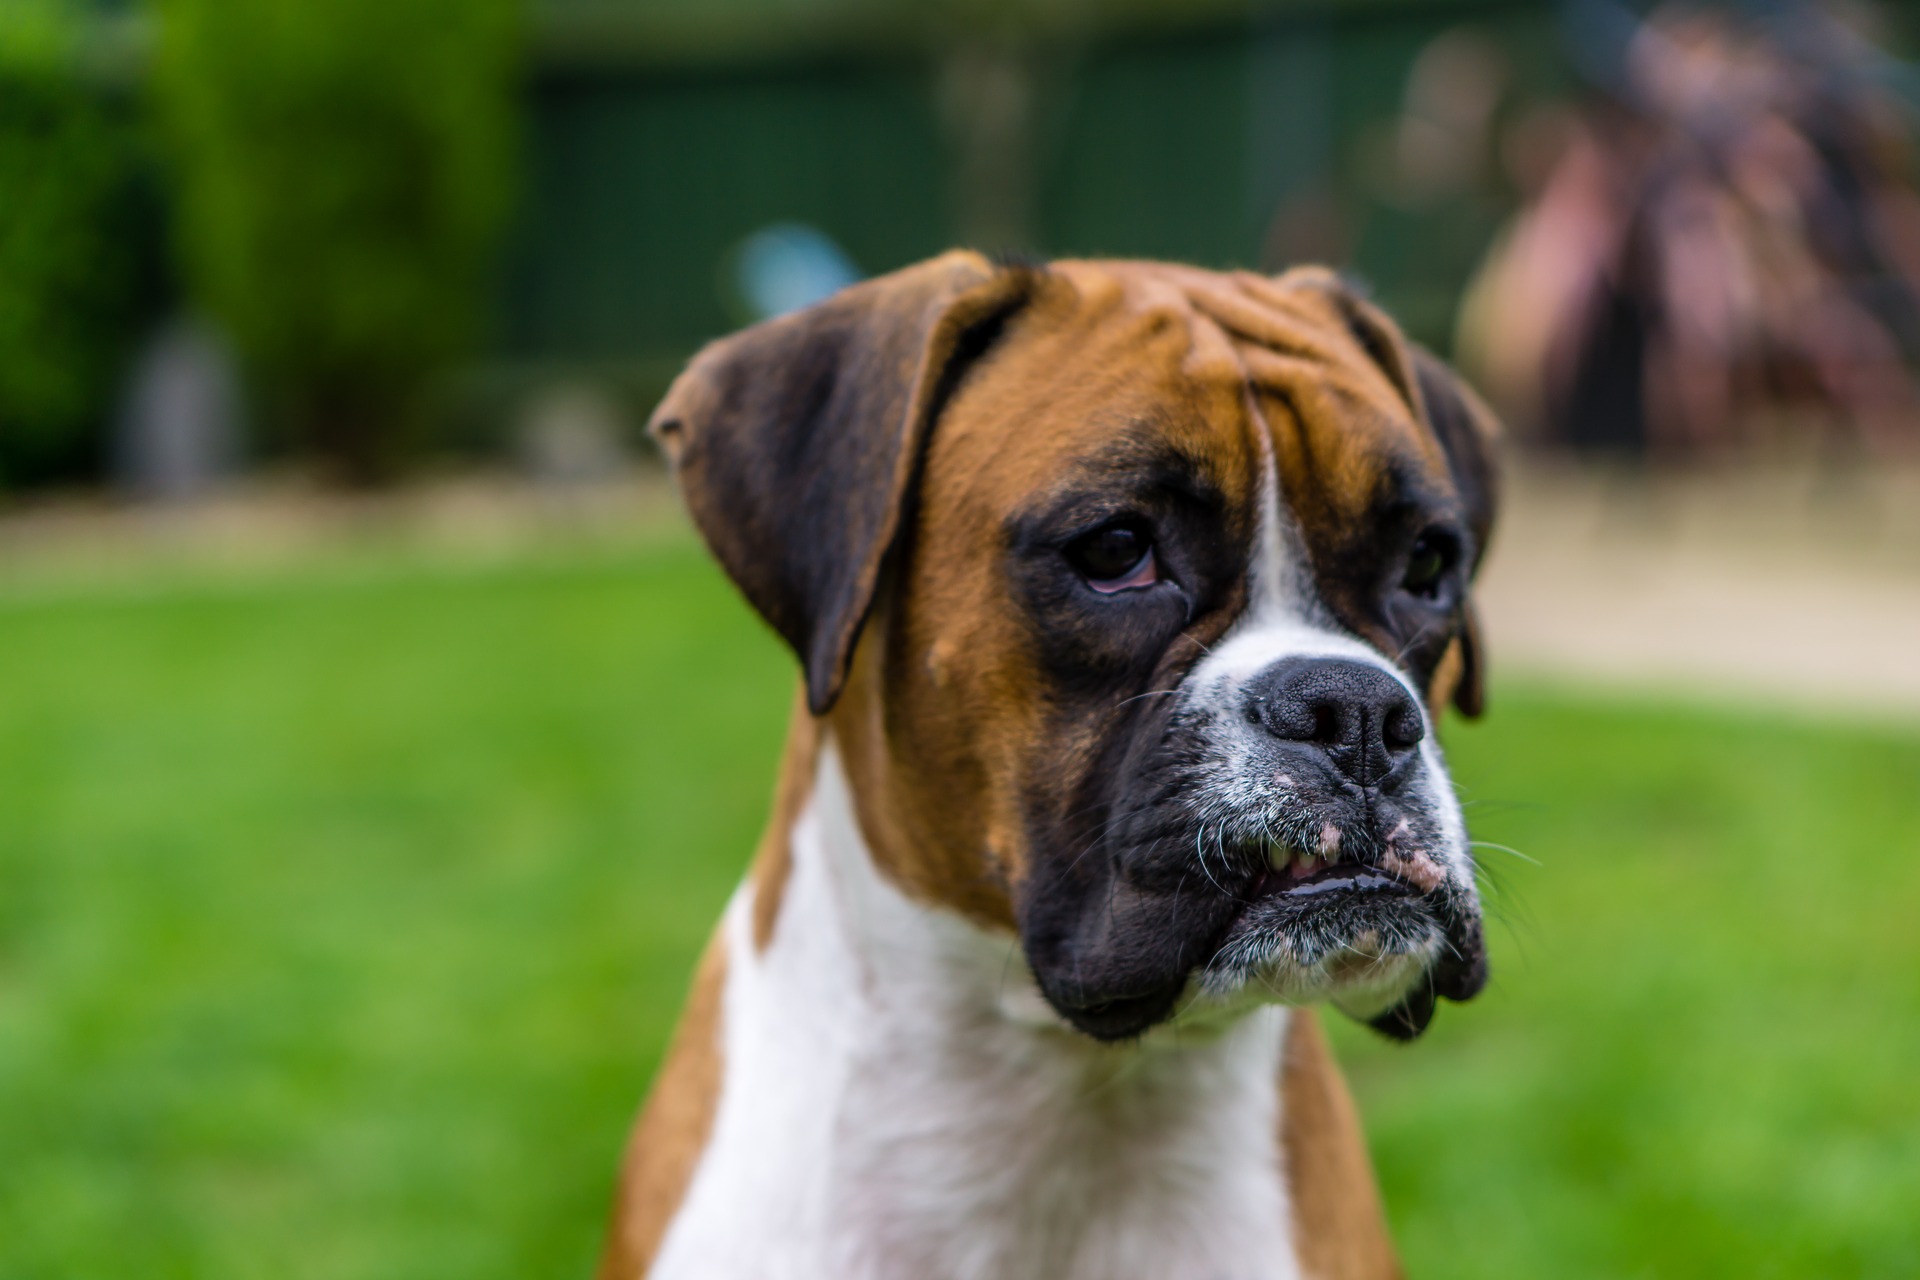 Top 10 Tips To Keep Your Boxer Dog Happy & Healthy - Boxer Dog Breed